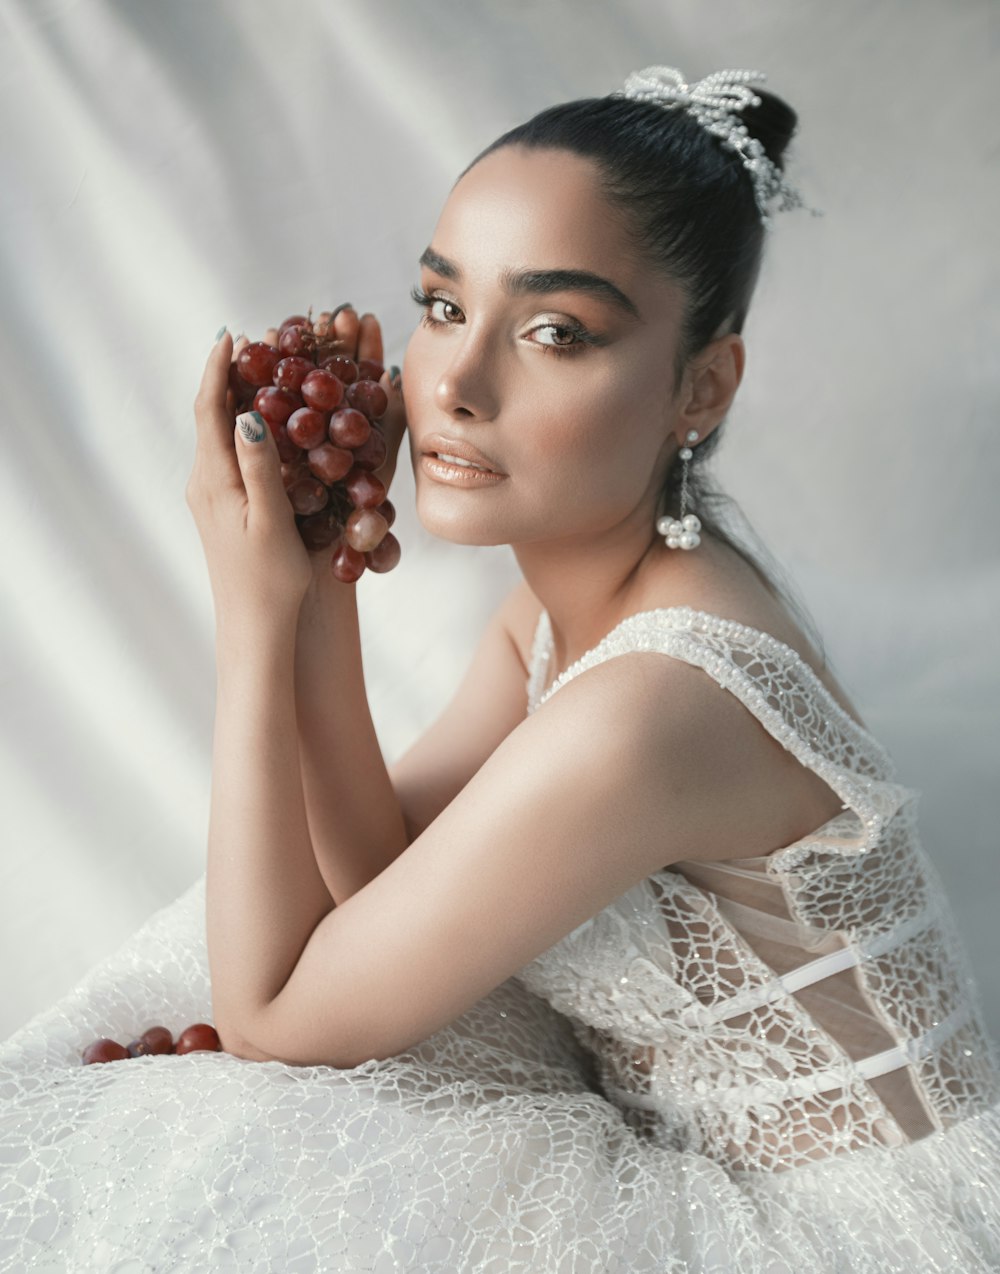 woman in white lace dress holding red round fruit